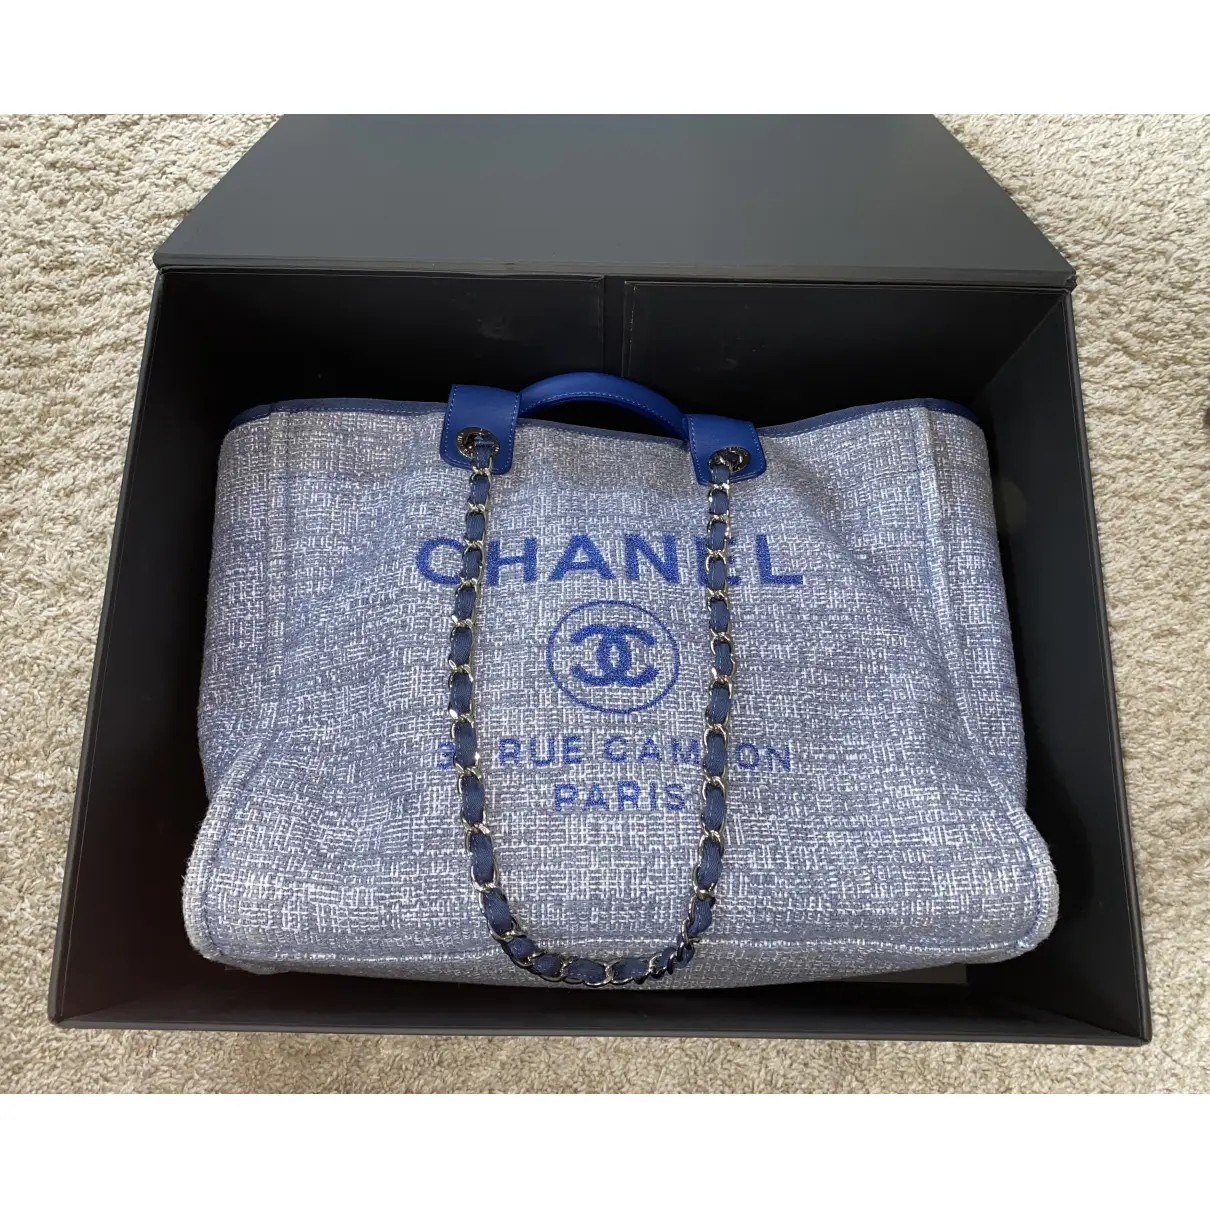 Deauville tweed tote Chanel